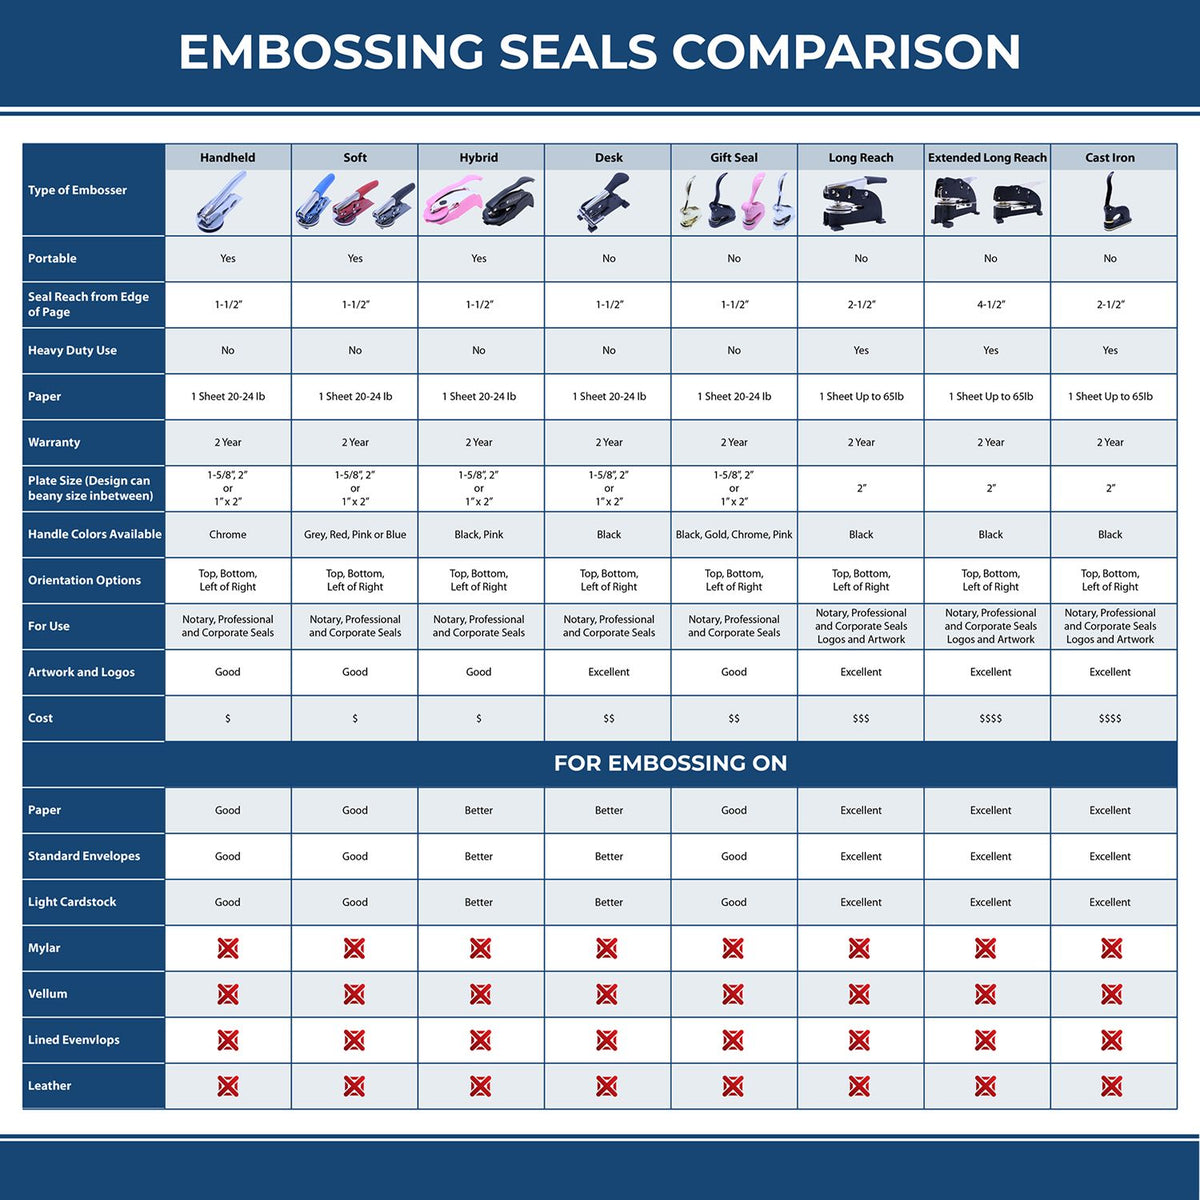 A comparison chart for the different types of mount models available for the State of Maine Long Reach Architectural Embossing Seal.